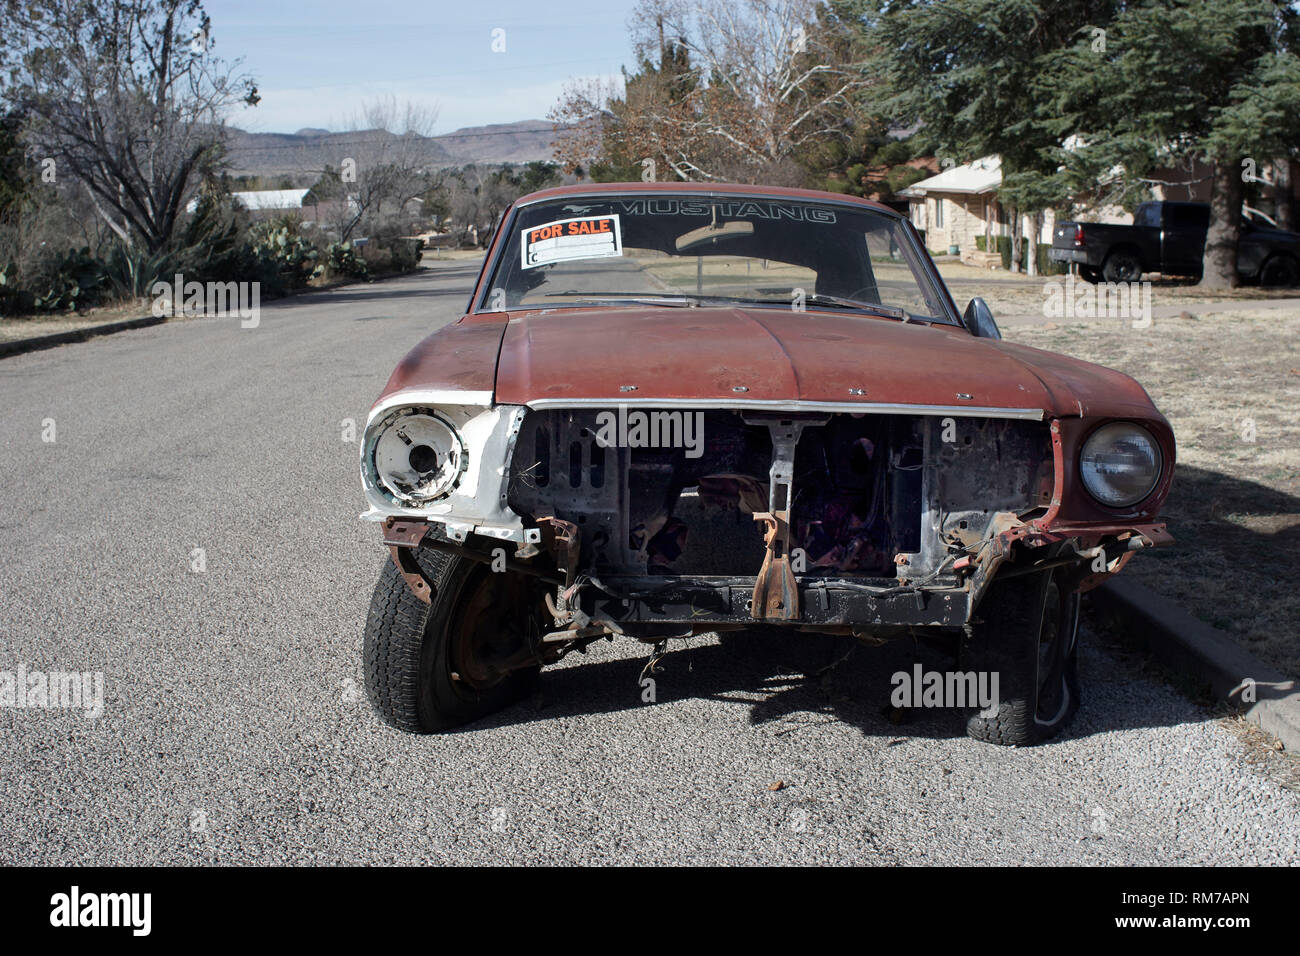 Old Ford Mustang , without engine and in overall poor condition, for sale in a street of Alpine, Texas. Stock Photo